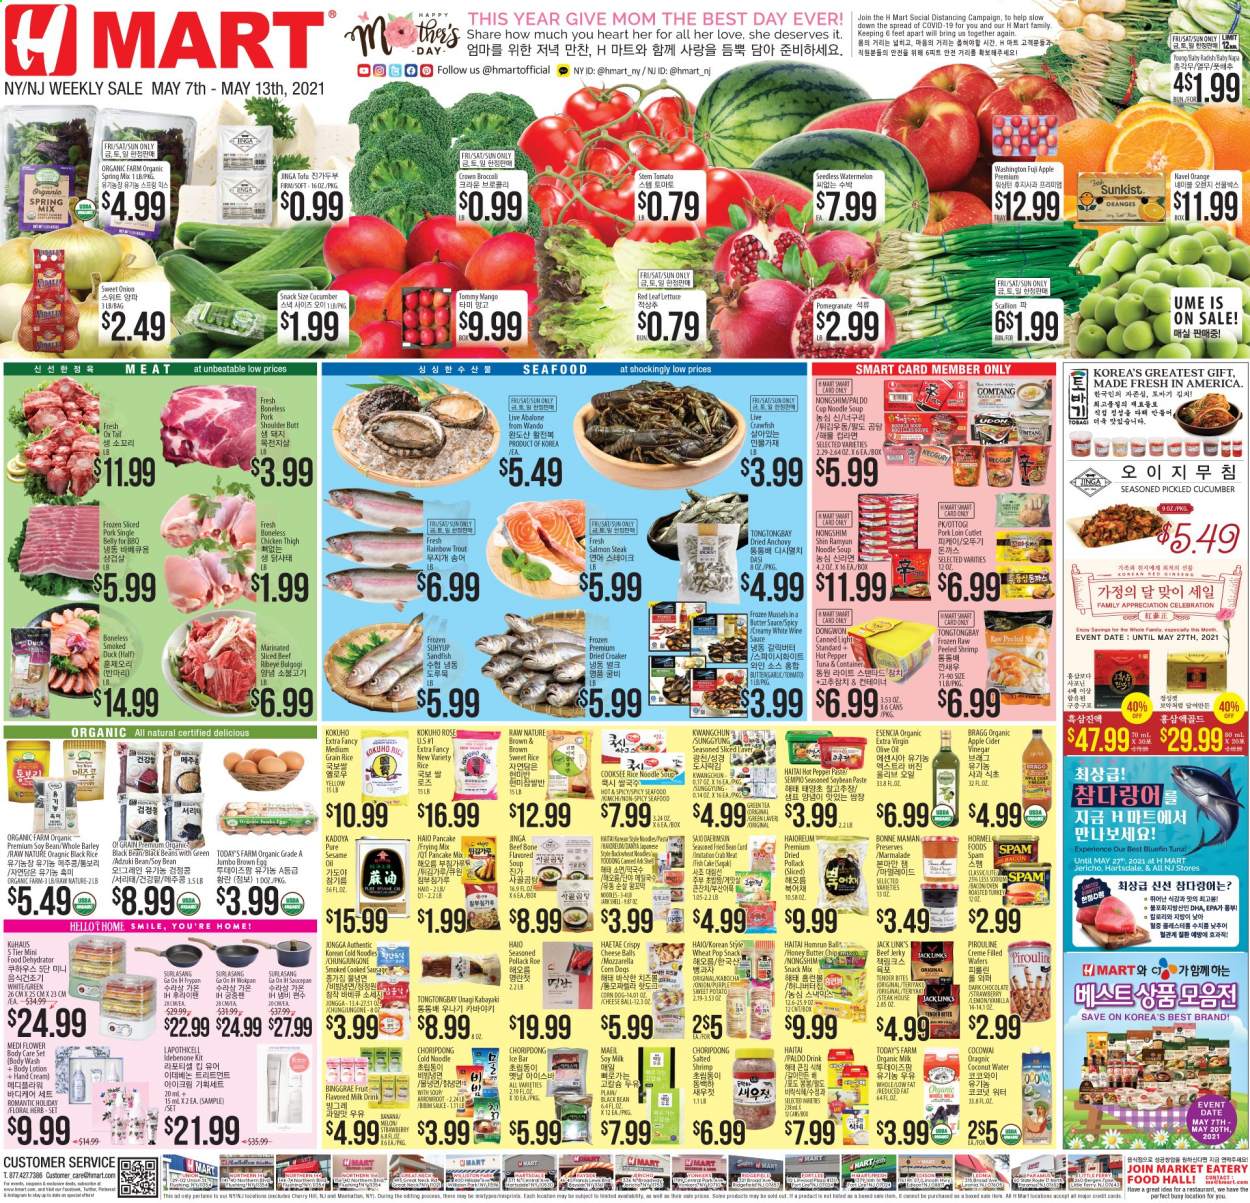 thumbnail - Hmart Flyer - 05/07/2021 - 05/13/2021 - Sales products - cake, beans, broccoli, corn, radishes, sweet potato, pumpkin, lettuce, mango, watermelon, oranges, Fuji apple, crab meat, mussels, salmon, trout, tuna, pollock, seafood, crab, fish, abalone, smoked duck, soup, pasta, pancakes, noodles cup, noodles, Hormel, bacon, beef jerky, jerky, sausage, Spam, mozzarella, cheese, curd, tofu, soy milk, organic milk, flavoured milk, eggs, butter, crawfish, fish cake, wafers, chocolate, snack, Celebration, dark chocolate, Jack Link's, anchovies, black beans, buckwheat, medium grain rice, herbs, apple cider vinegar, extra virgin olive oil, sesame oil, vinegar, olive oil, oil, honey, coconut water, green tea, tea, white wine, rosé wine, steak, pork loin, pork meat, pork shoulder, body wash, body lotion, hand cream, tray, cup, saucepan, frying pan, melons, pomegranate, navel oranges. Page 1.